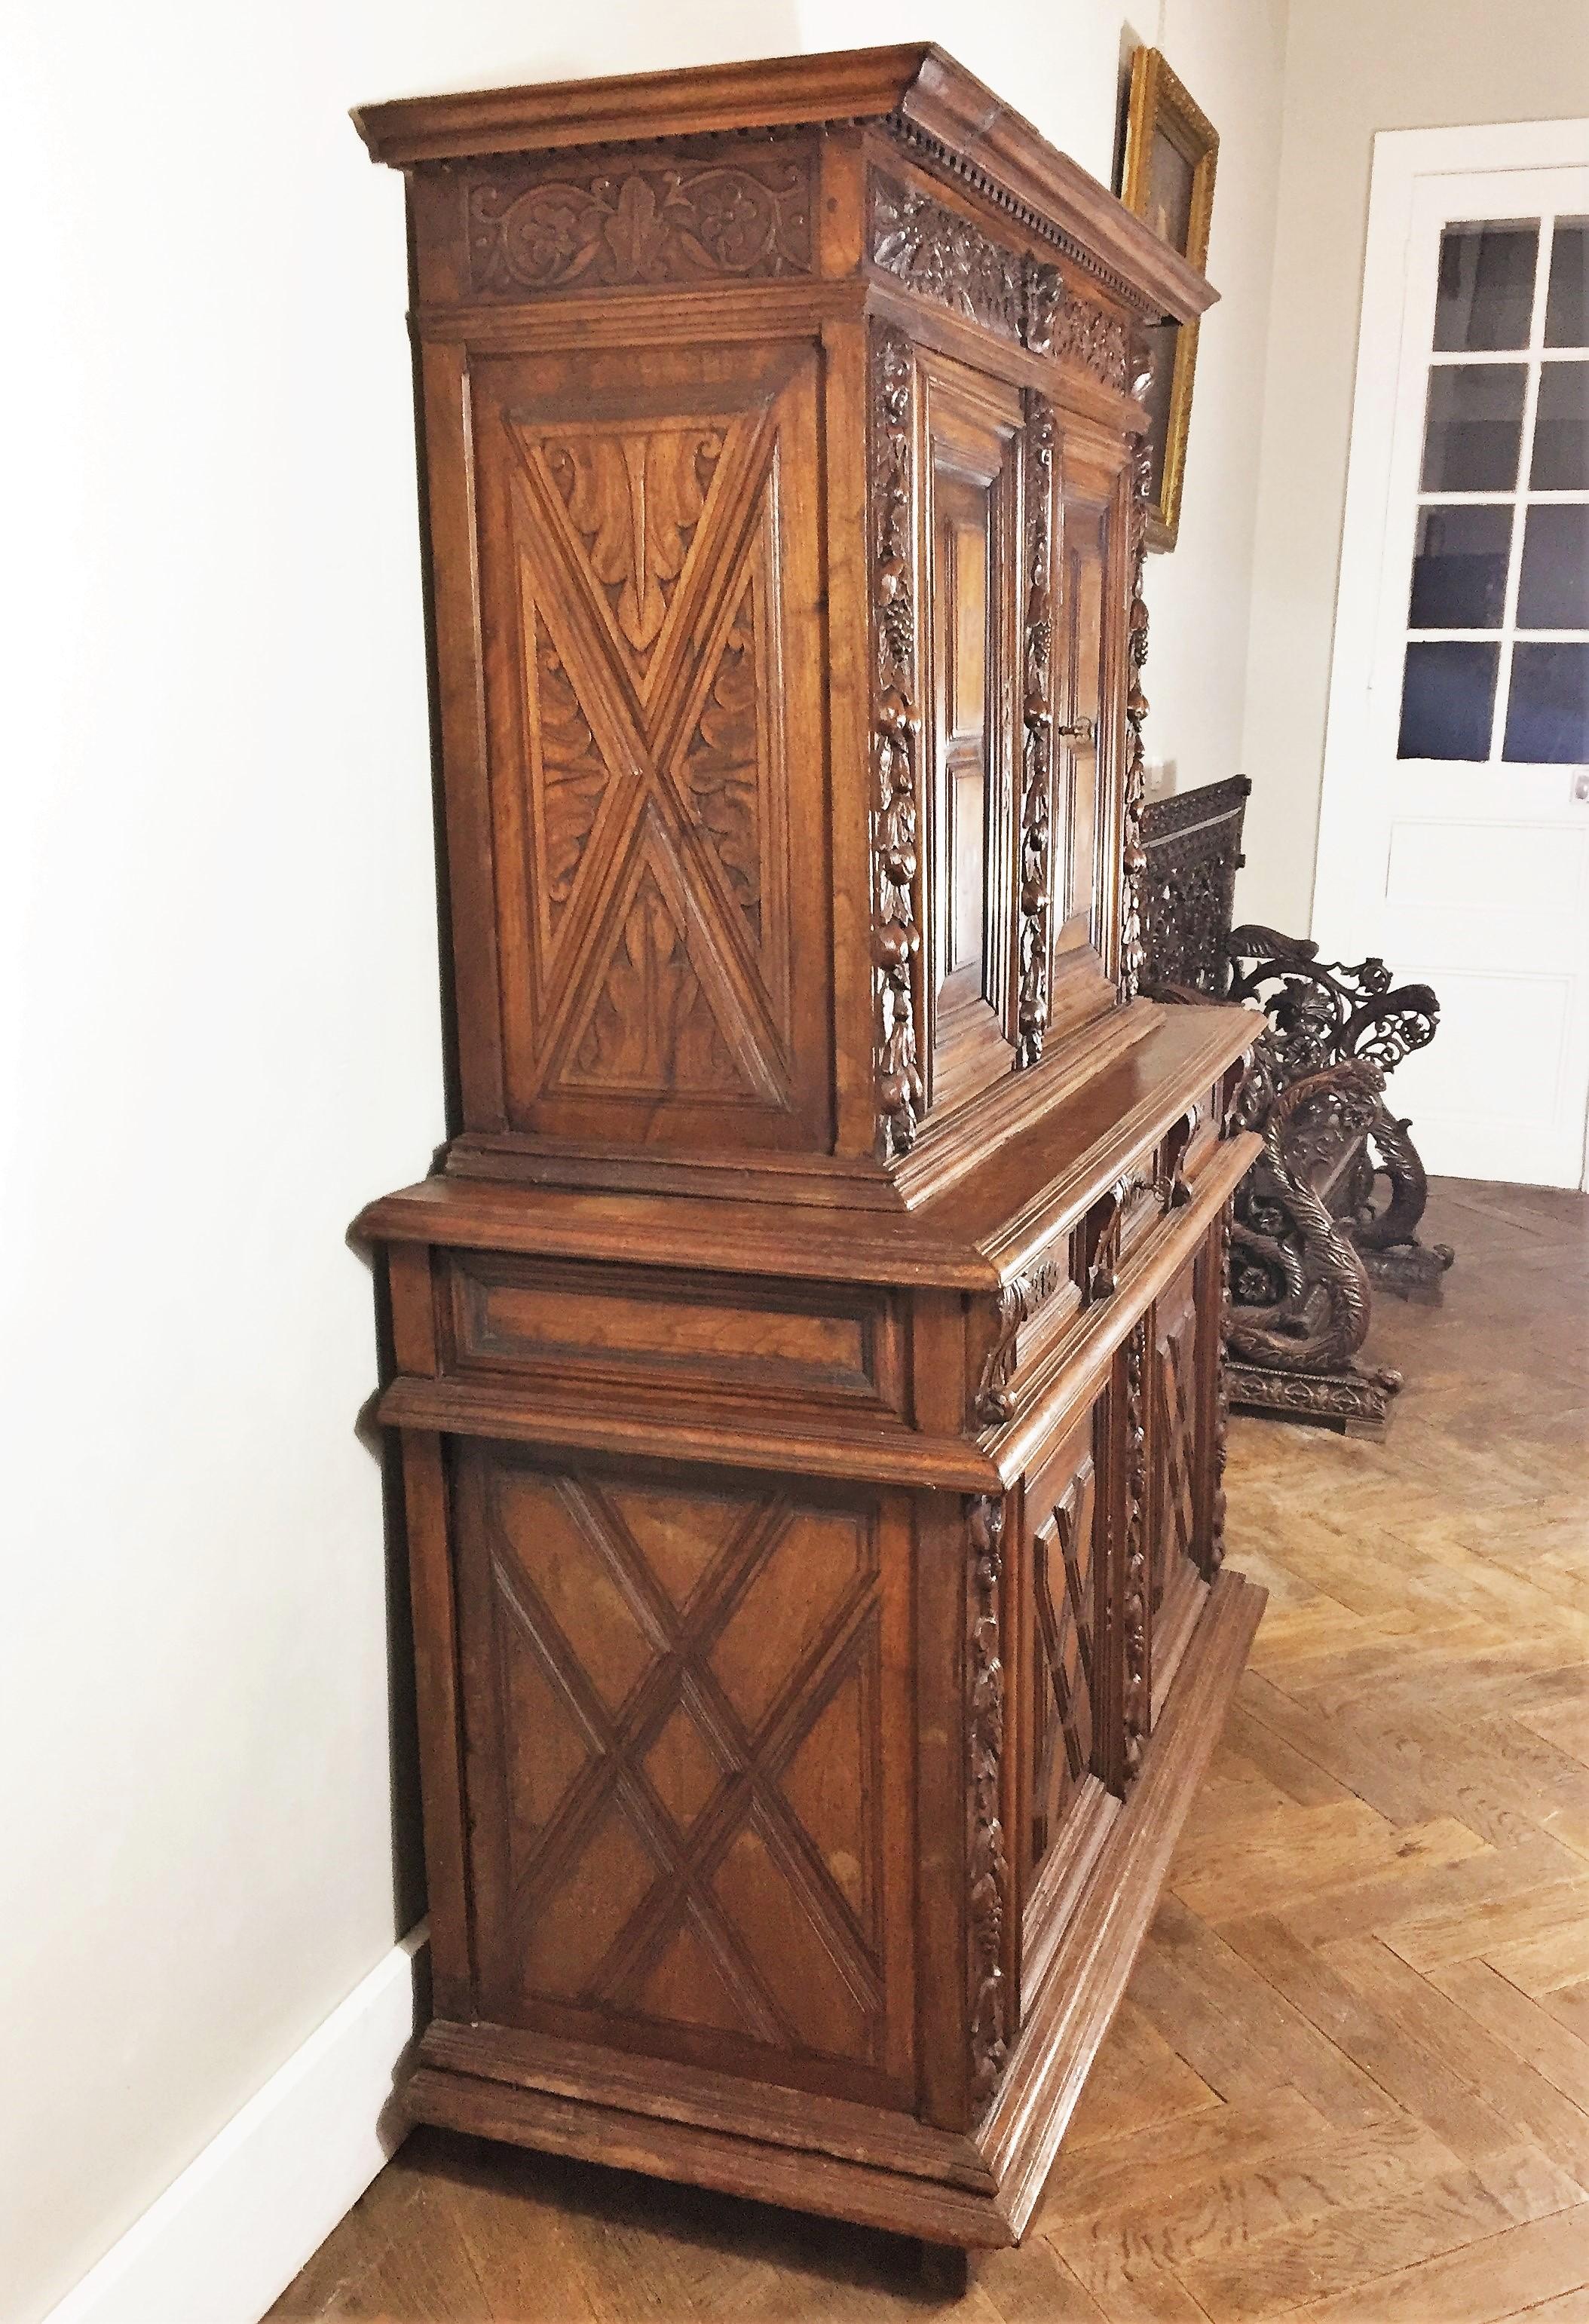 Iron French Carved Walnut Double Trunk Buffet - Renaissance circa 1600 - France For Sale